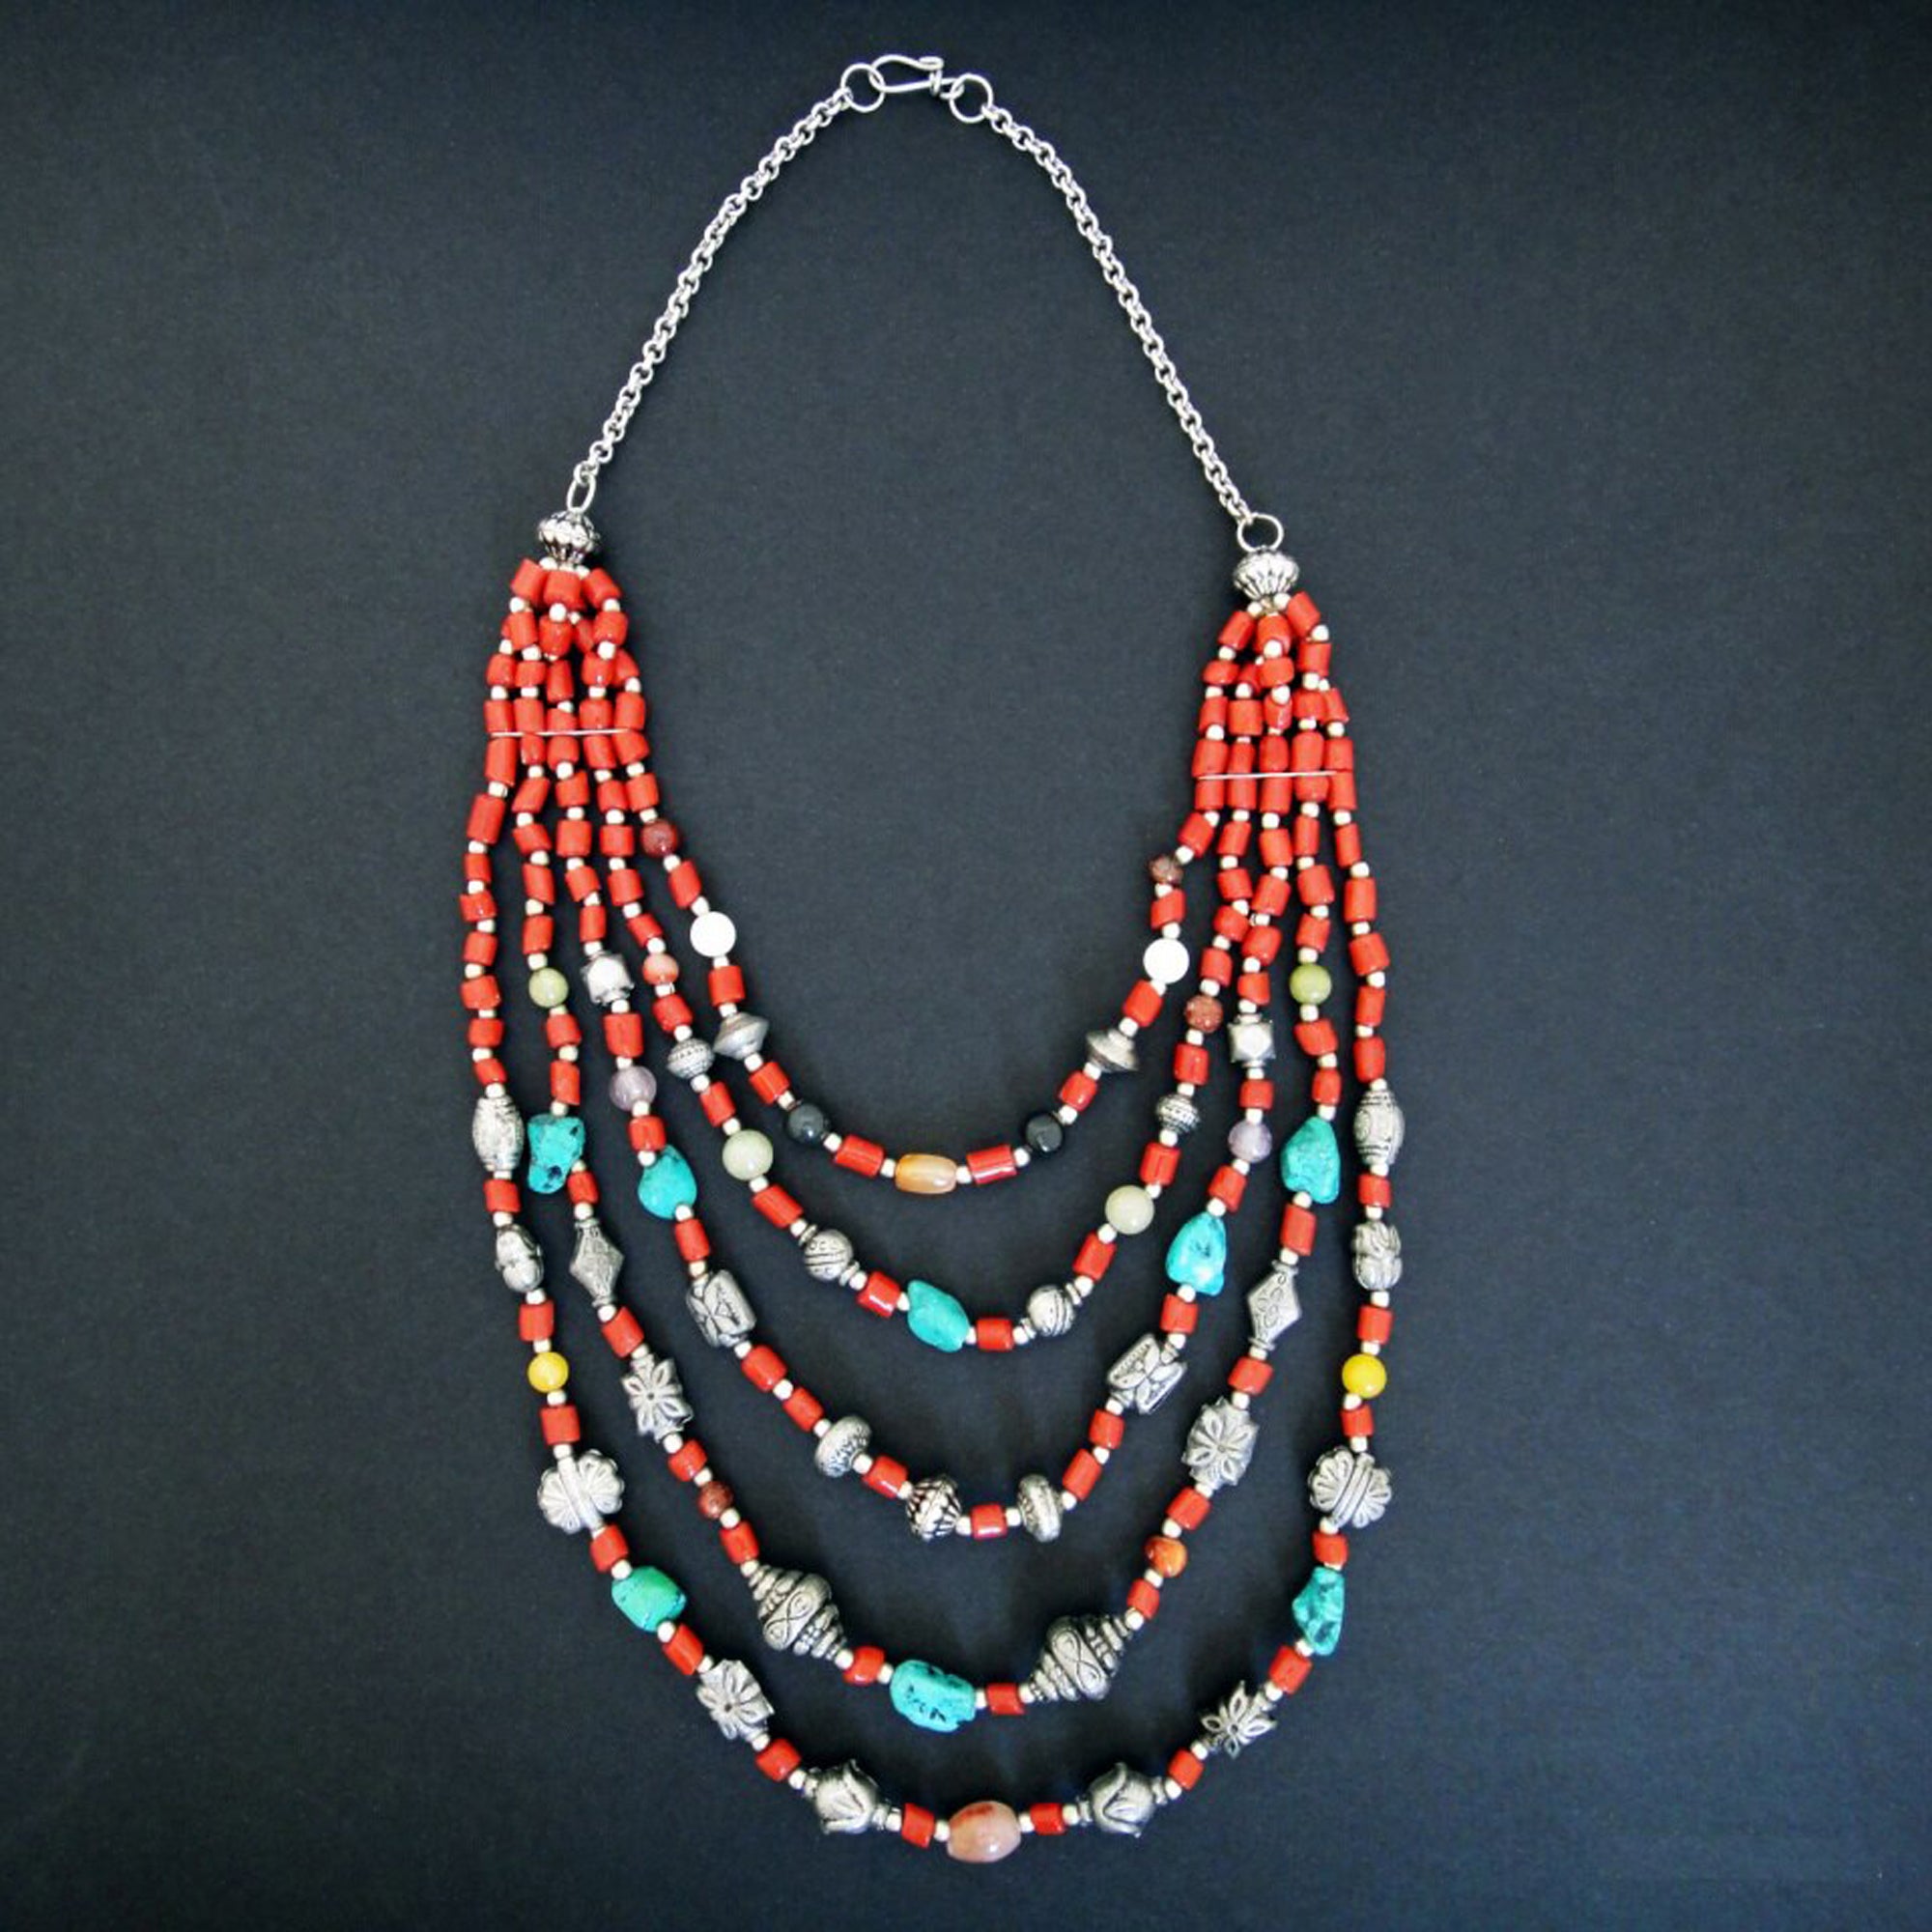 Himalayan Lapis and Coral Necklace, Jewelry